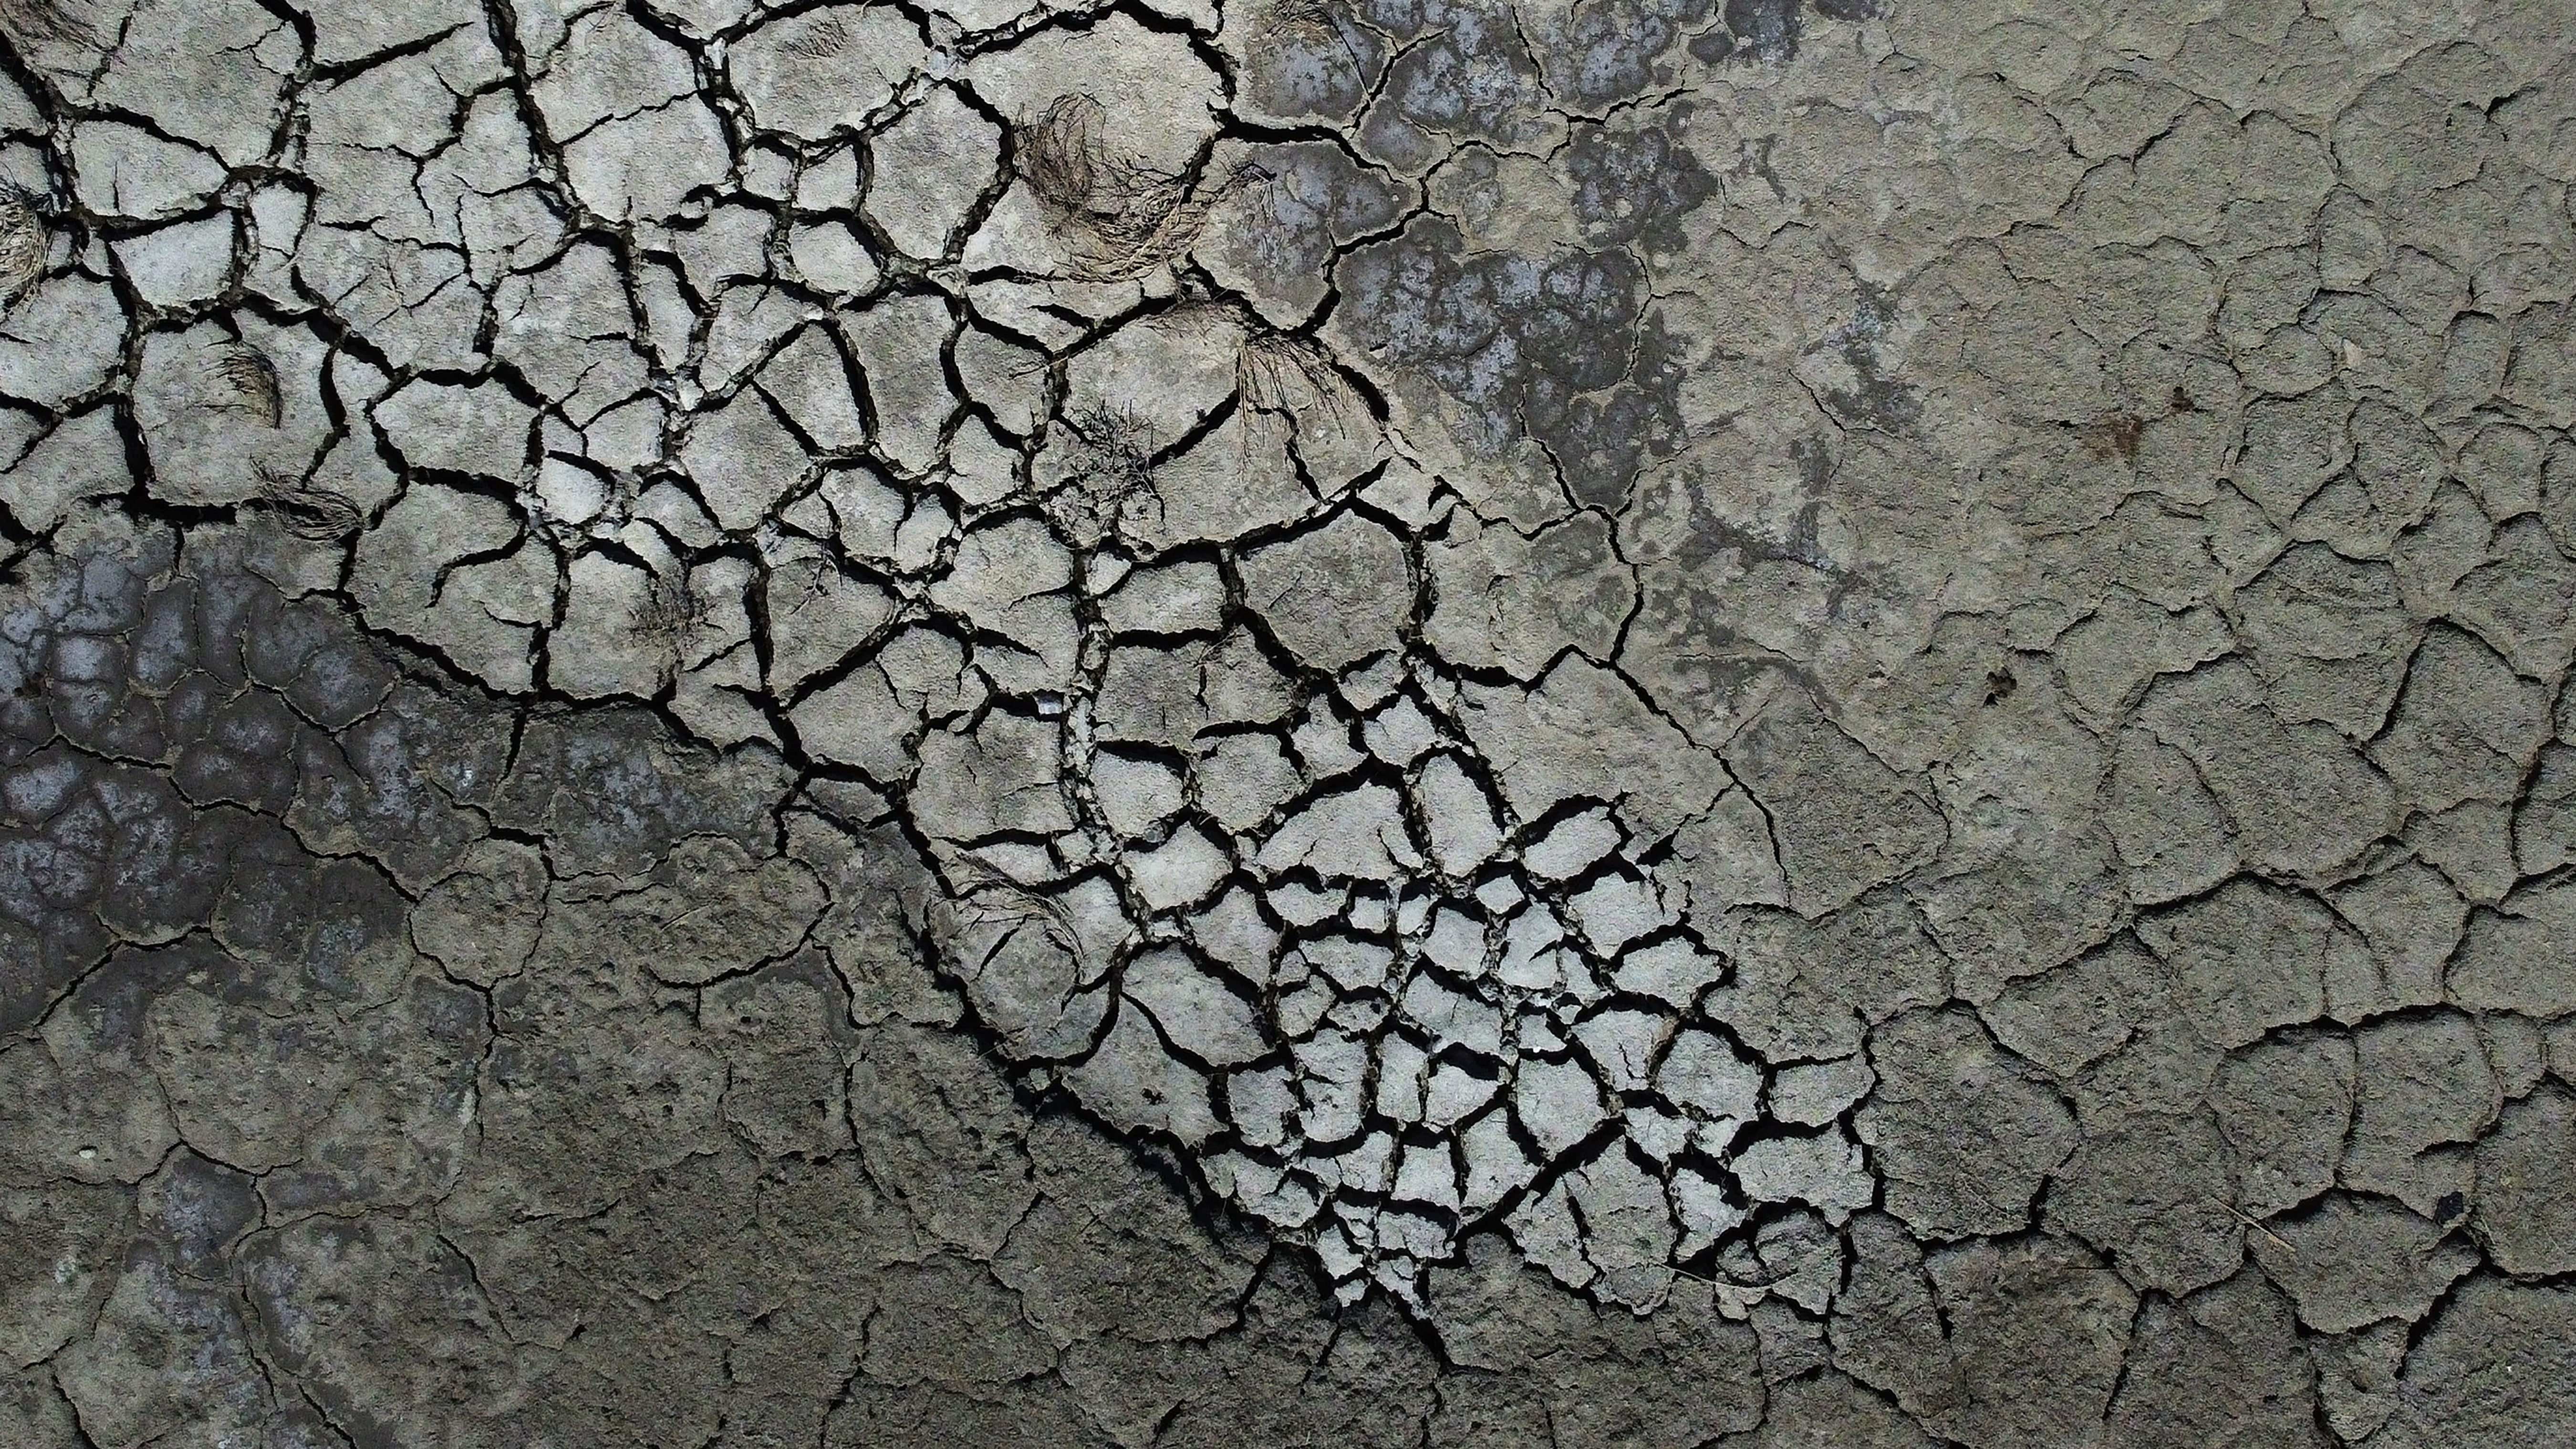 Dried cracked mud is visible at the Antelope Island Marina due to low water levels on the Great Salt Lake, near Syracuse, Utah